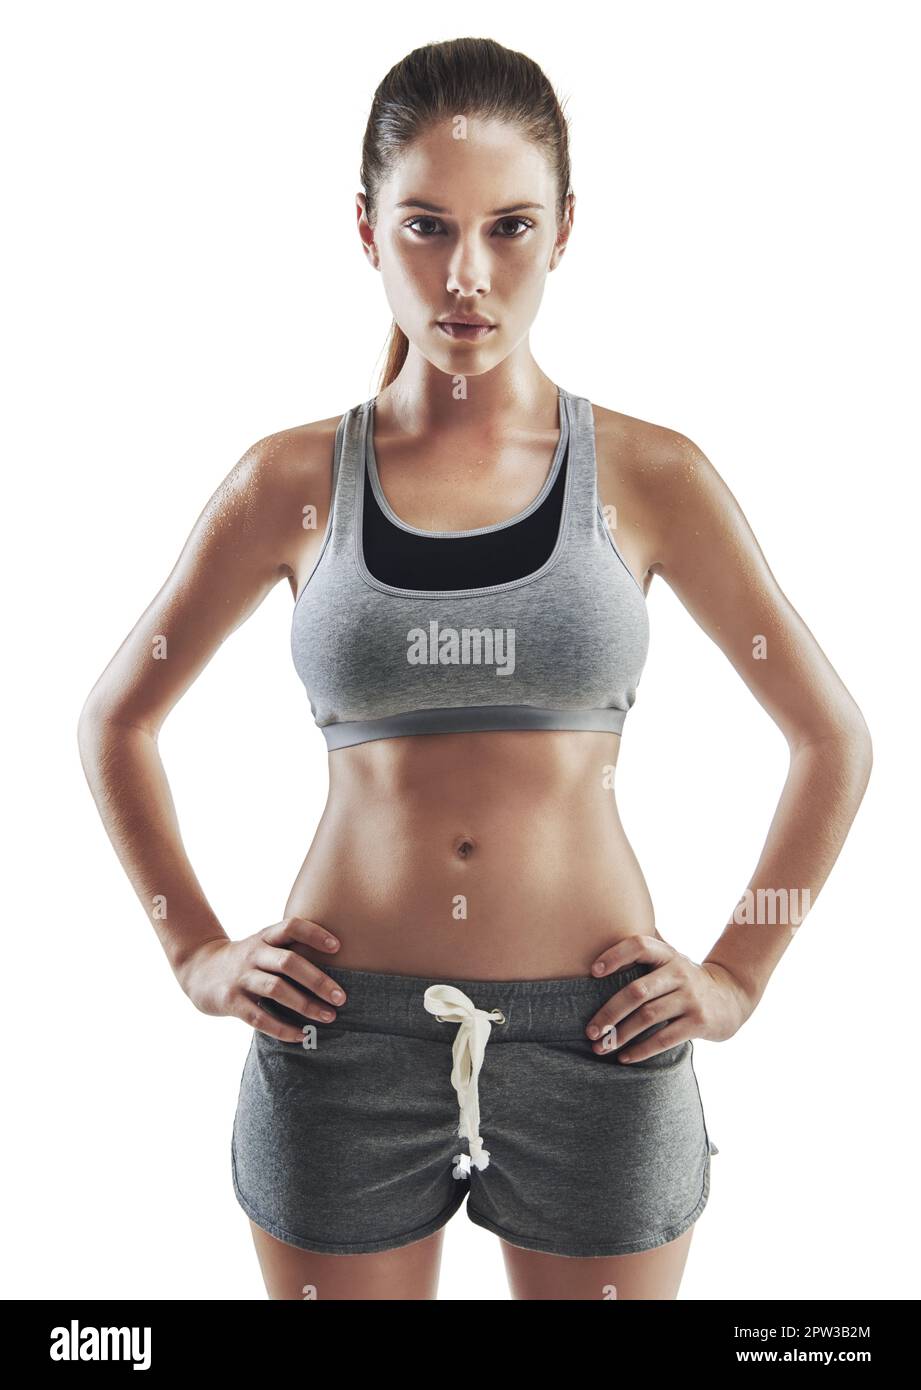 https://c8.alamy.com/comp/2PW3B2M/ill-reach-my-fitness-goals-cropped-portrait-of-a-young-female-athlete-standing-arms-akimbo-against-white-background-2PW3B2M.jpg